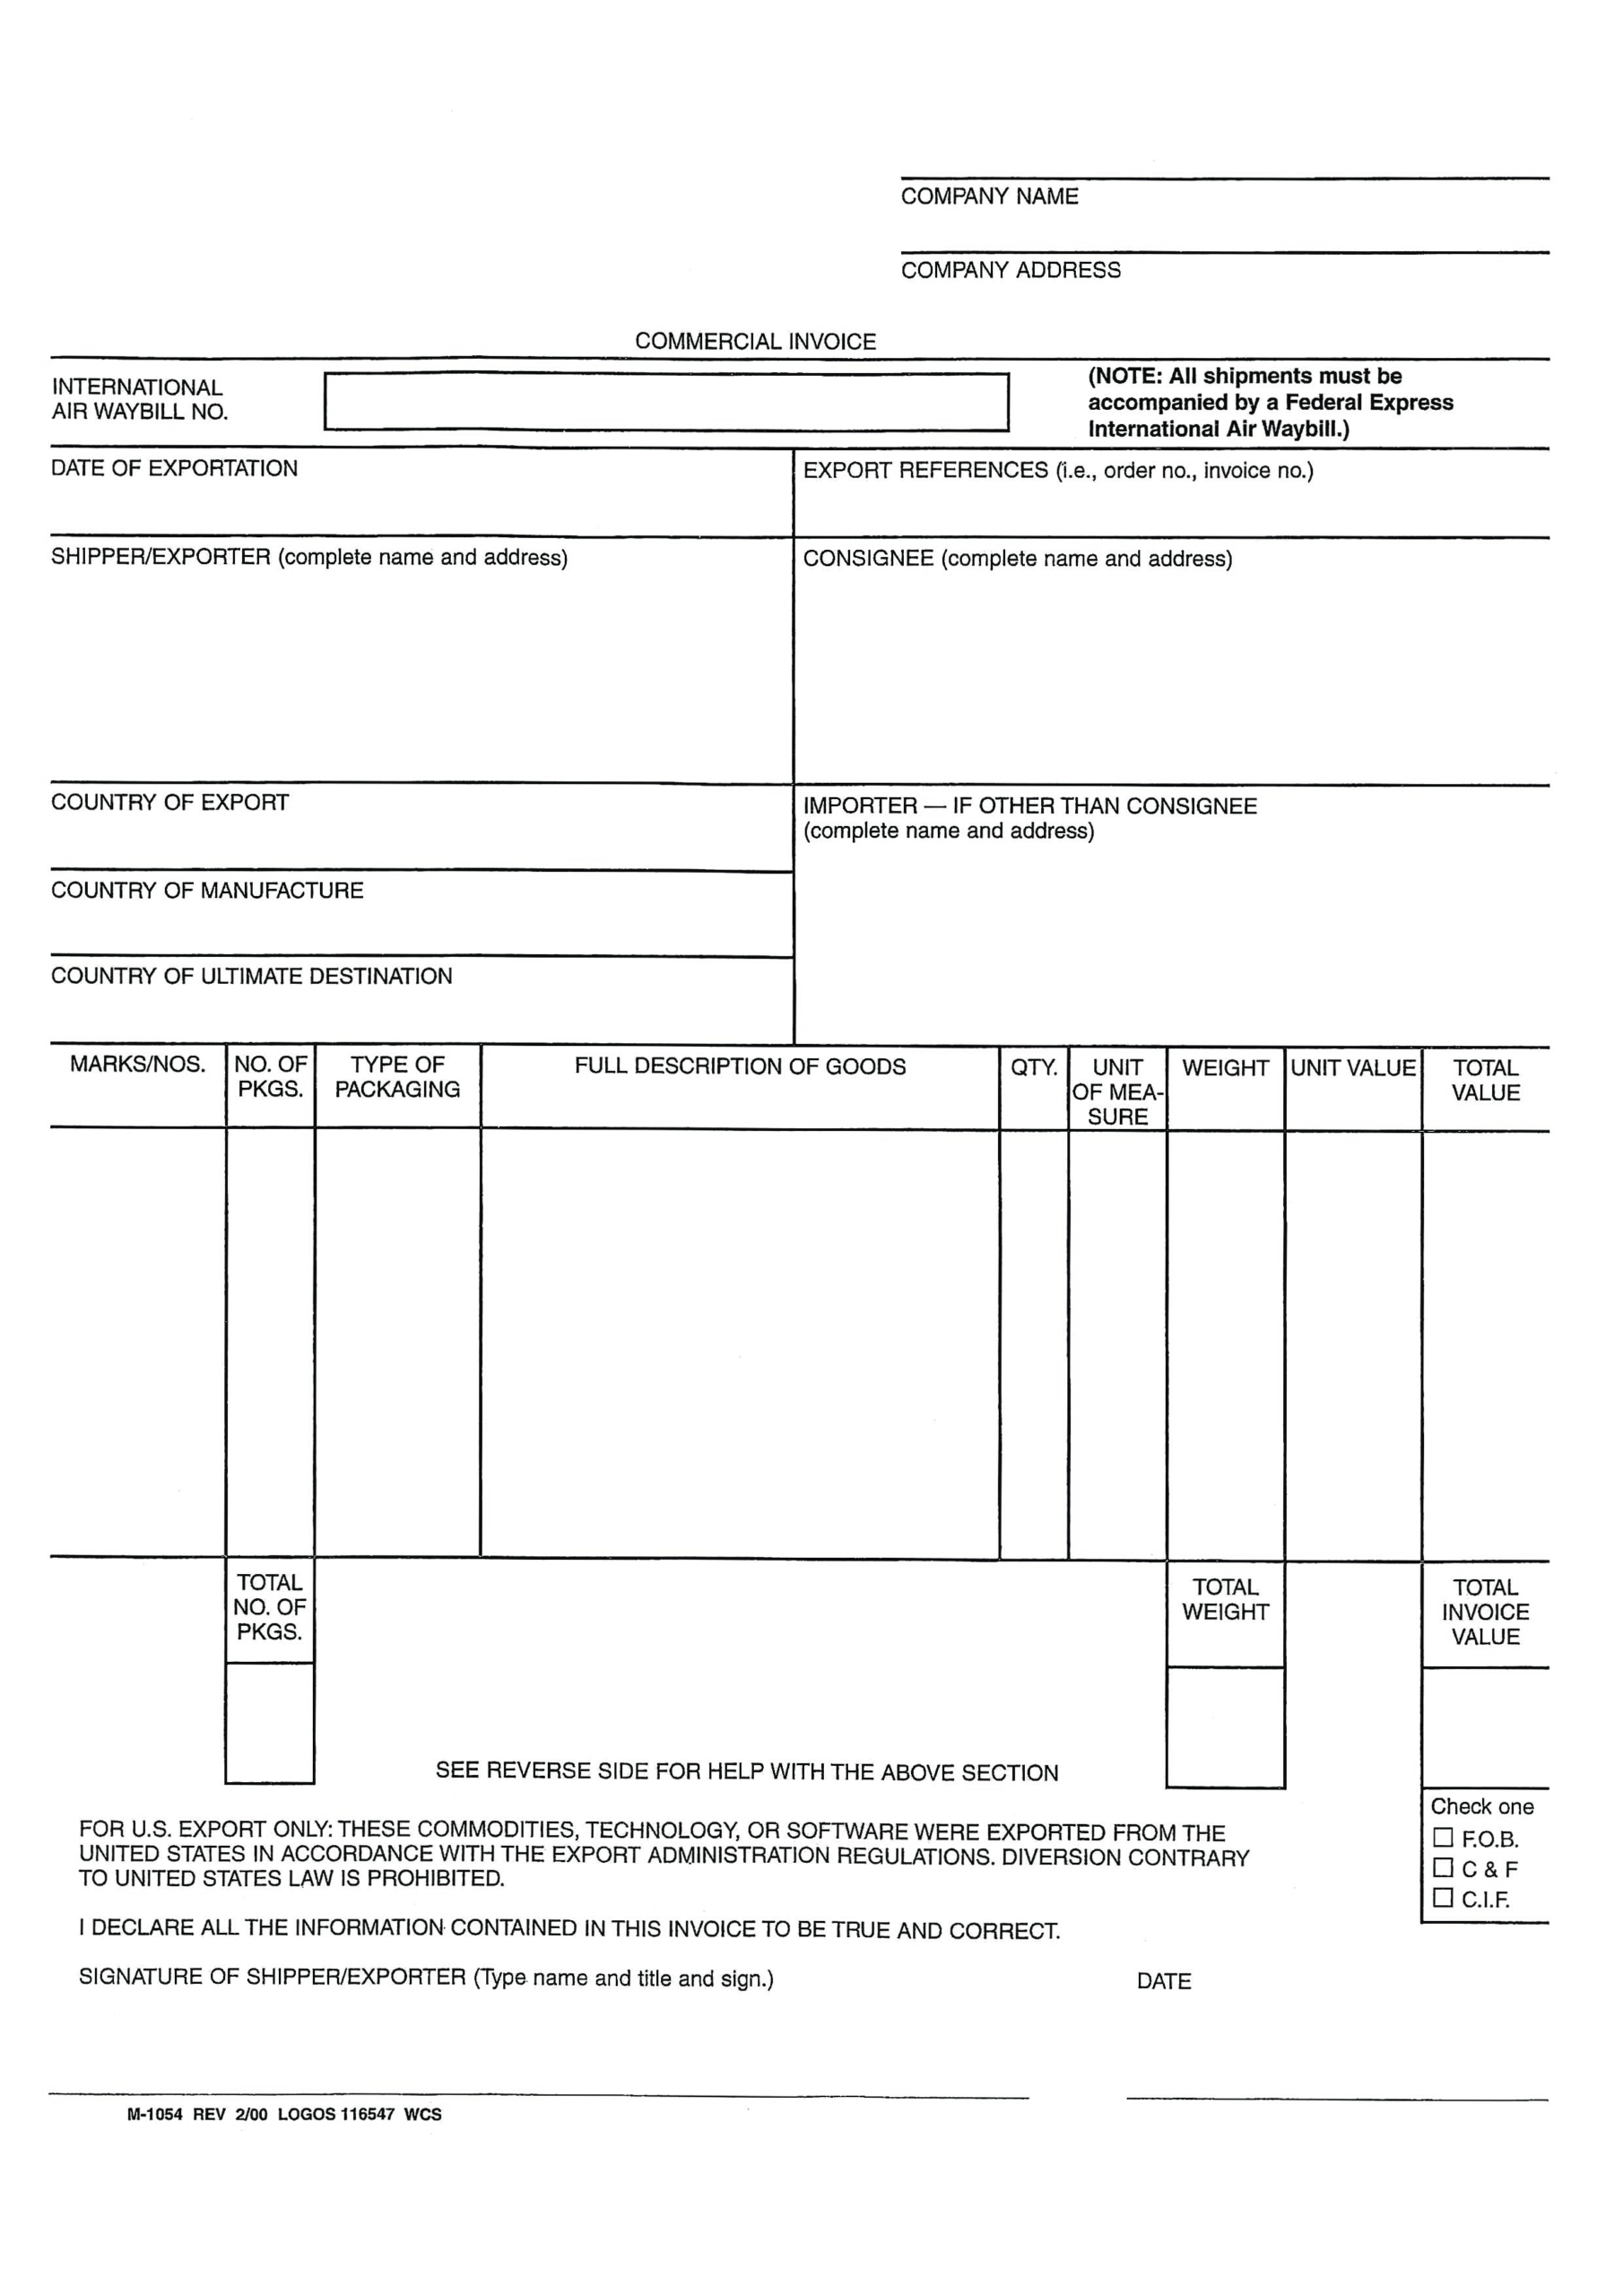 Blank Commercial Invoice Word | Templates At Pertaining To Commercial Invoice Template Word Doc